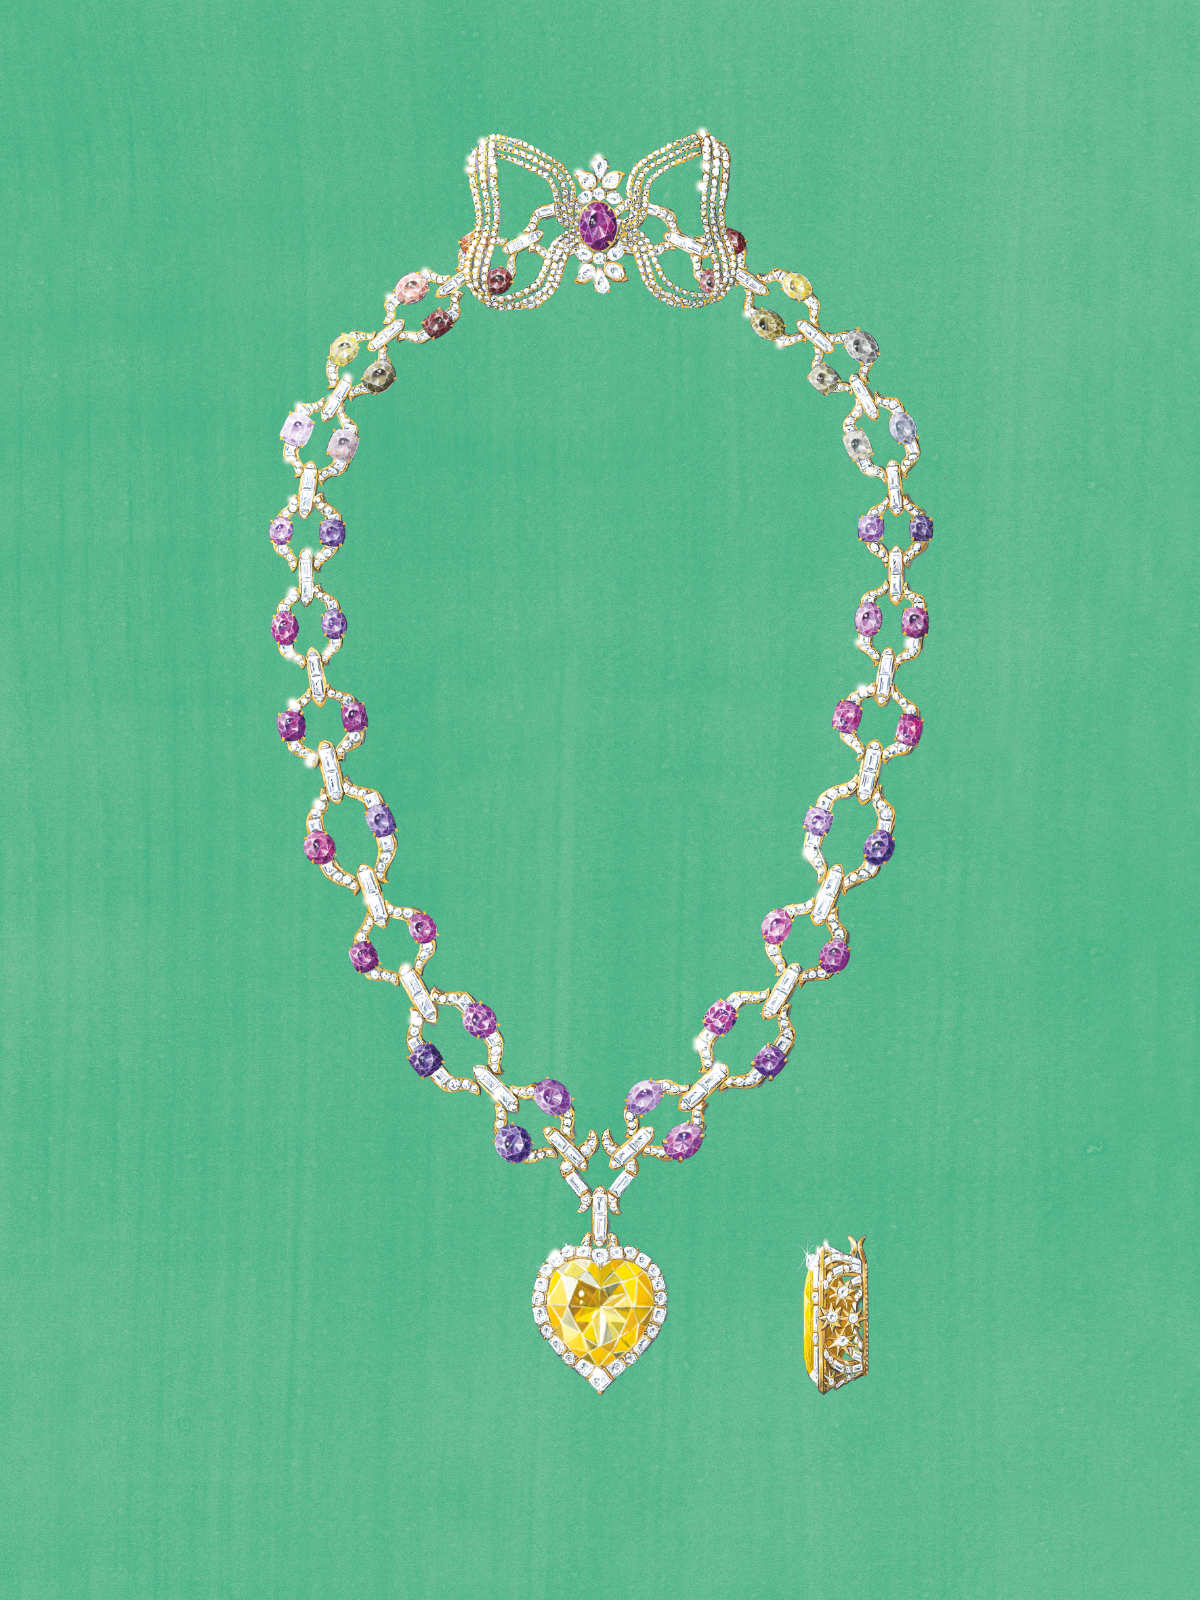 Gucci Introduces Its Latest High Jewelry Collection: Allegoria